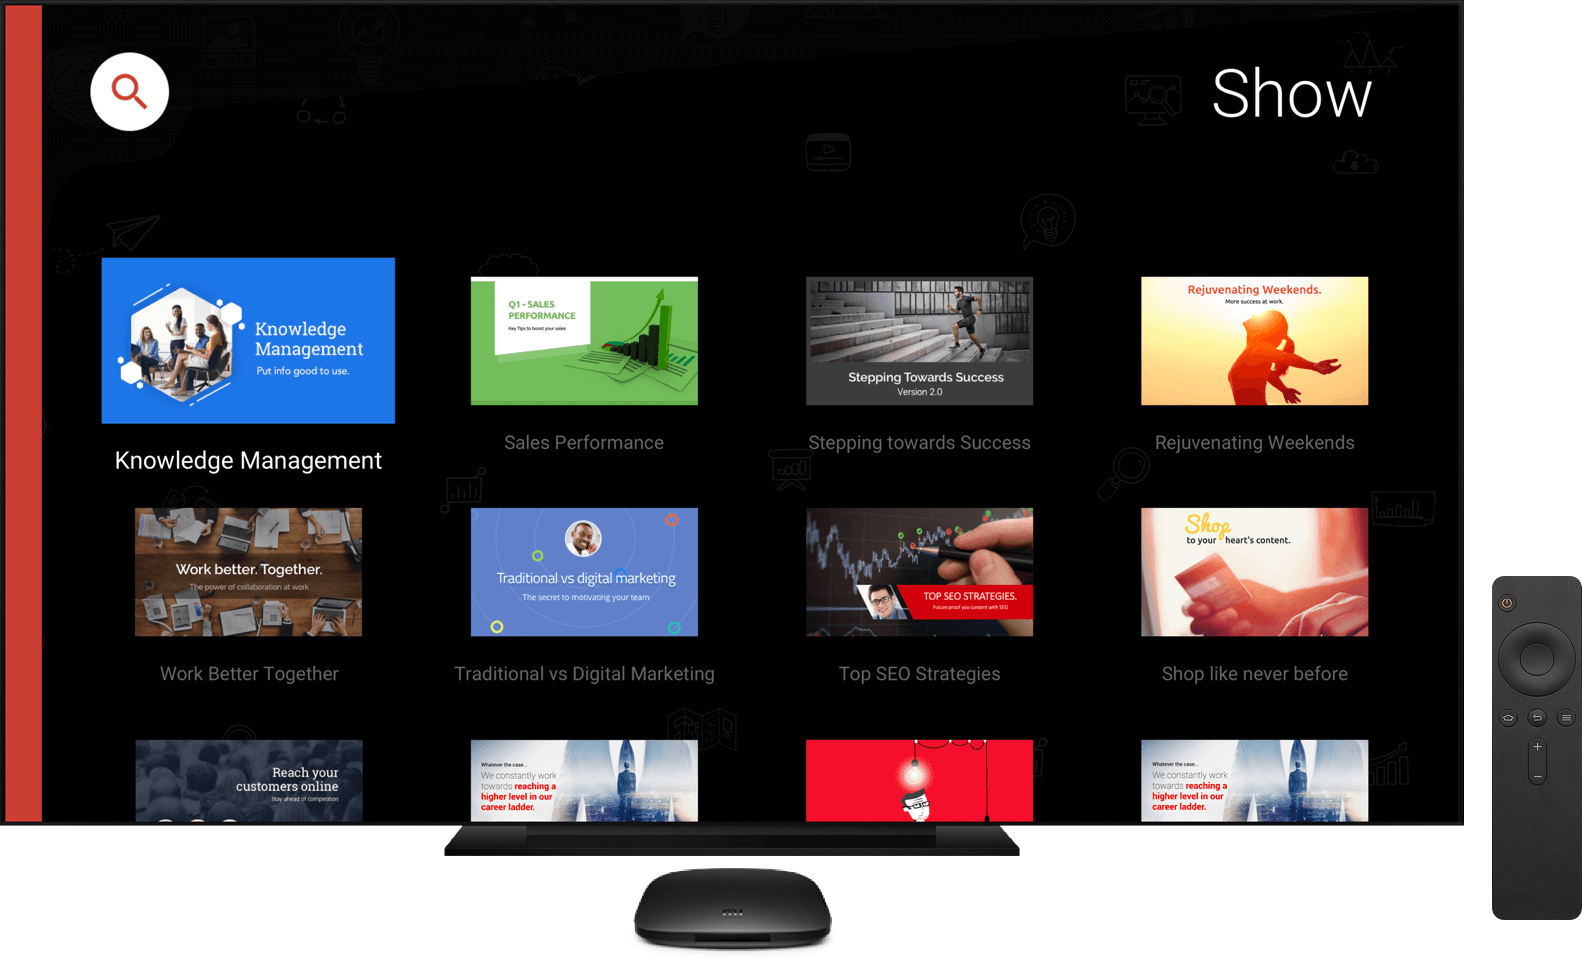 Show per Android TV